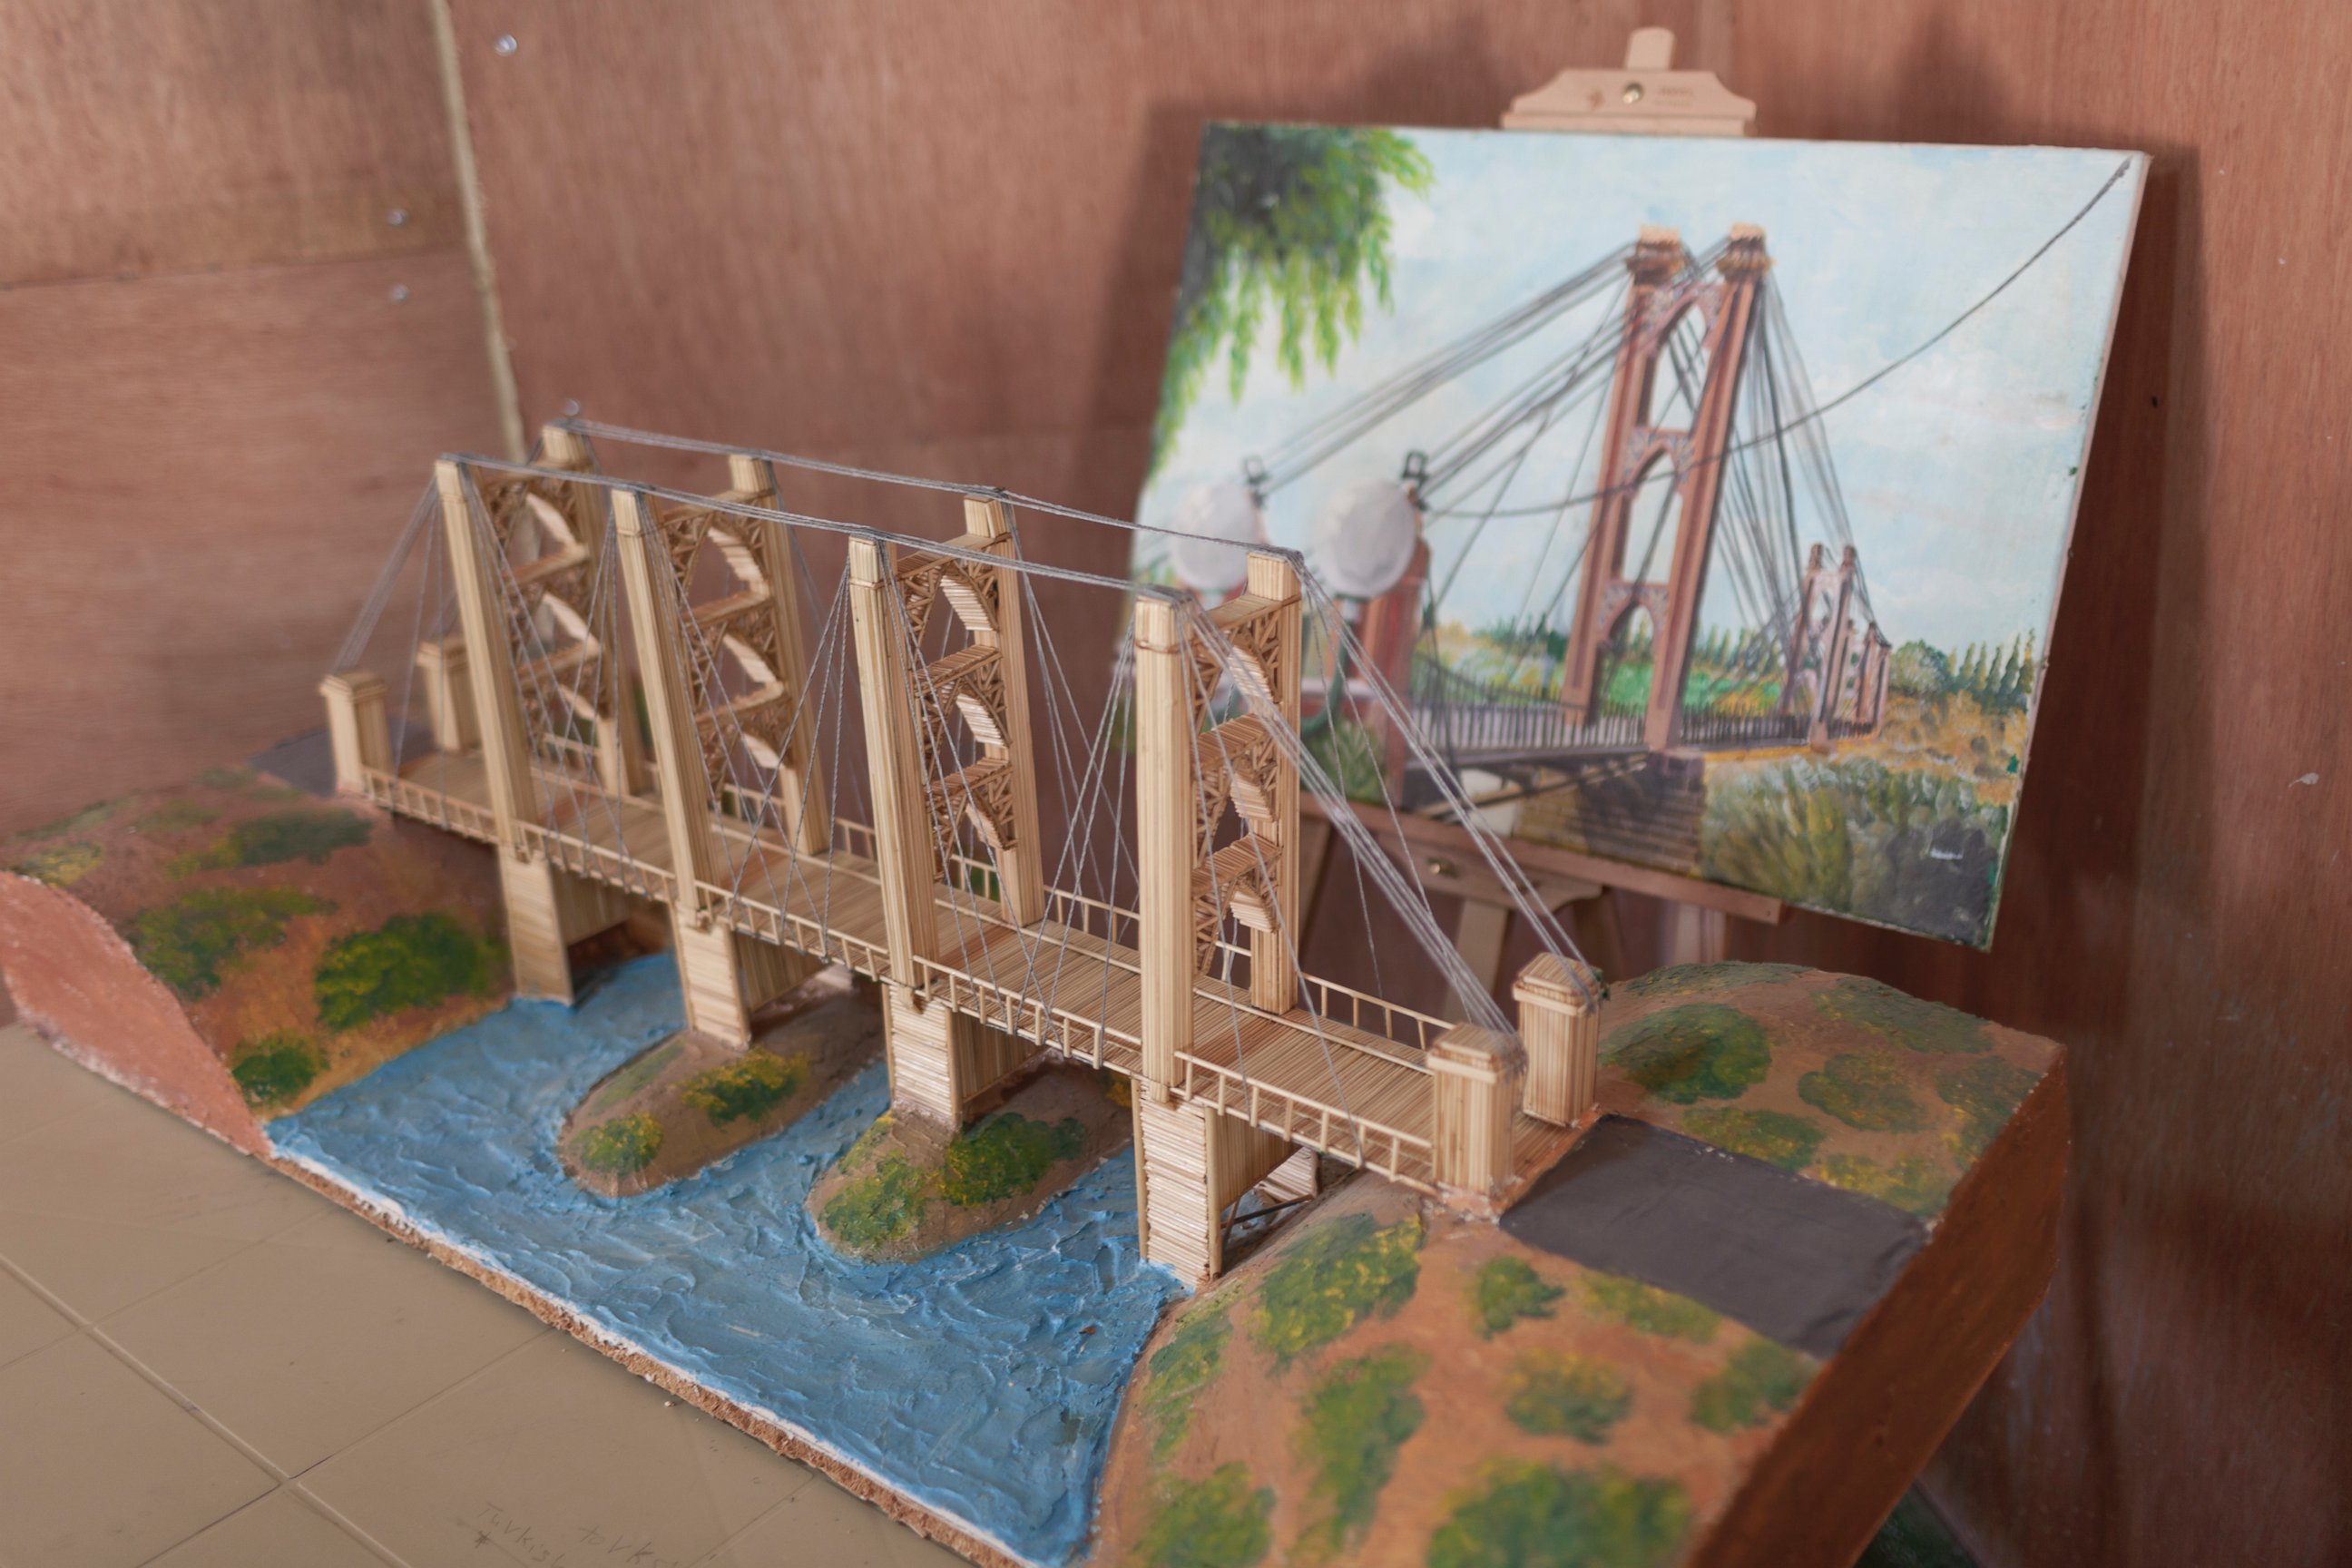 PHOTO: The Deir ez-Zor suspension bridge is one of the miniature replicas displayed at the community centre.